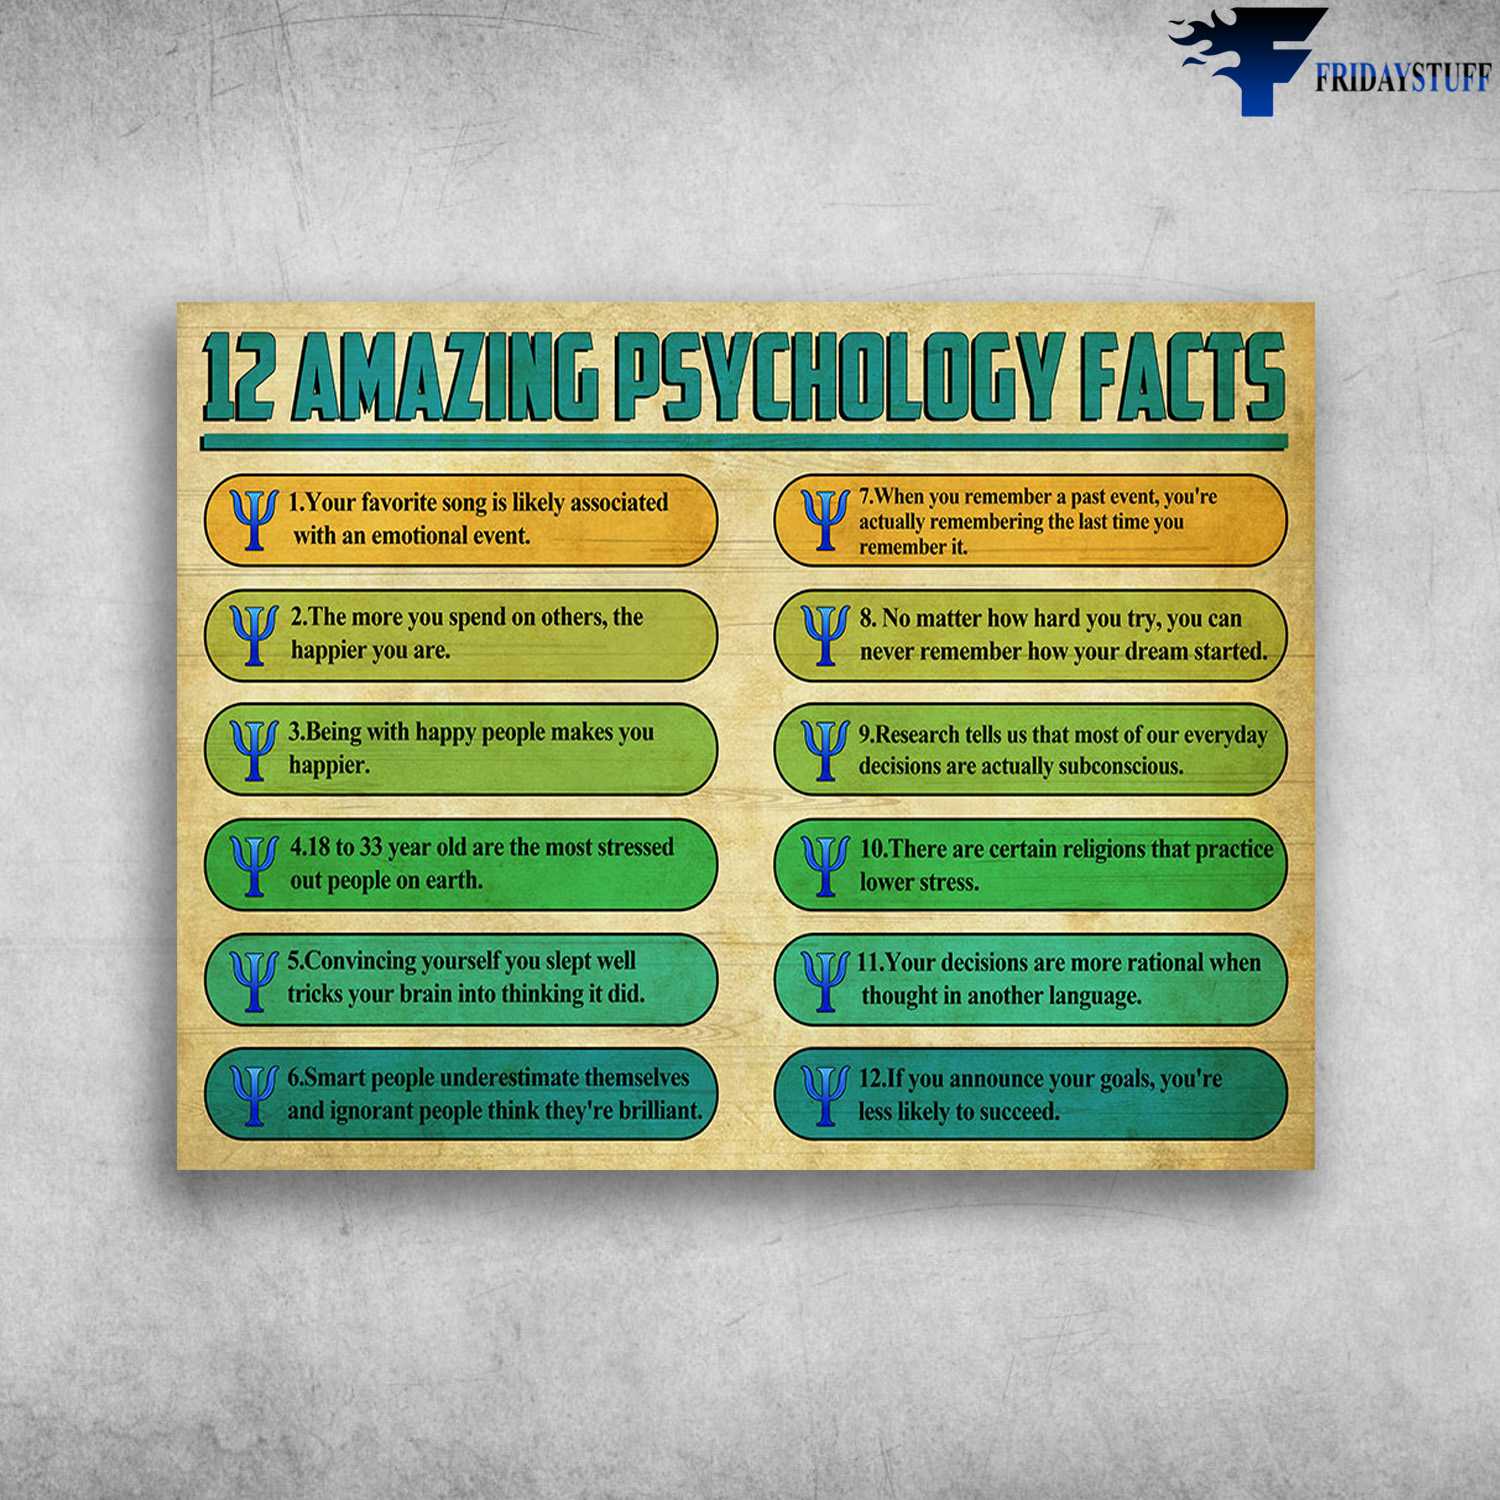 12 Amazing Psychology Facts, Your Famorite Song Is Likely Associated, With An Emotional Event, The More You Spend On Others, The Happier You Are